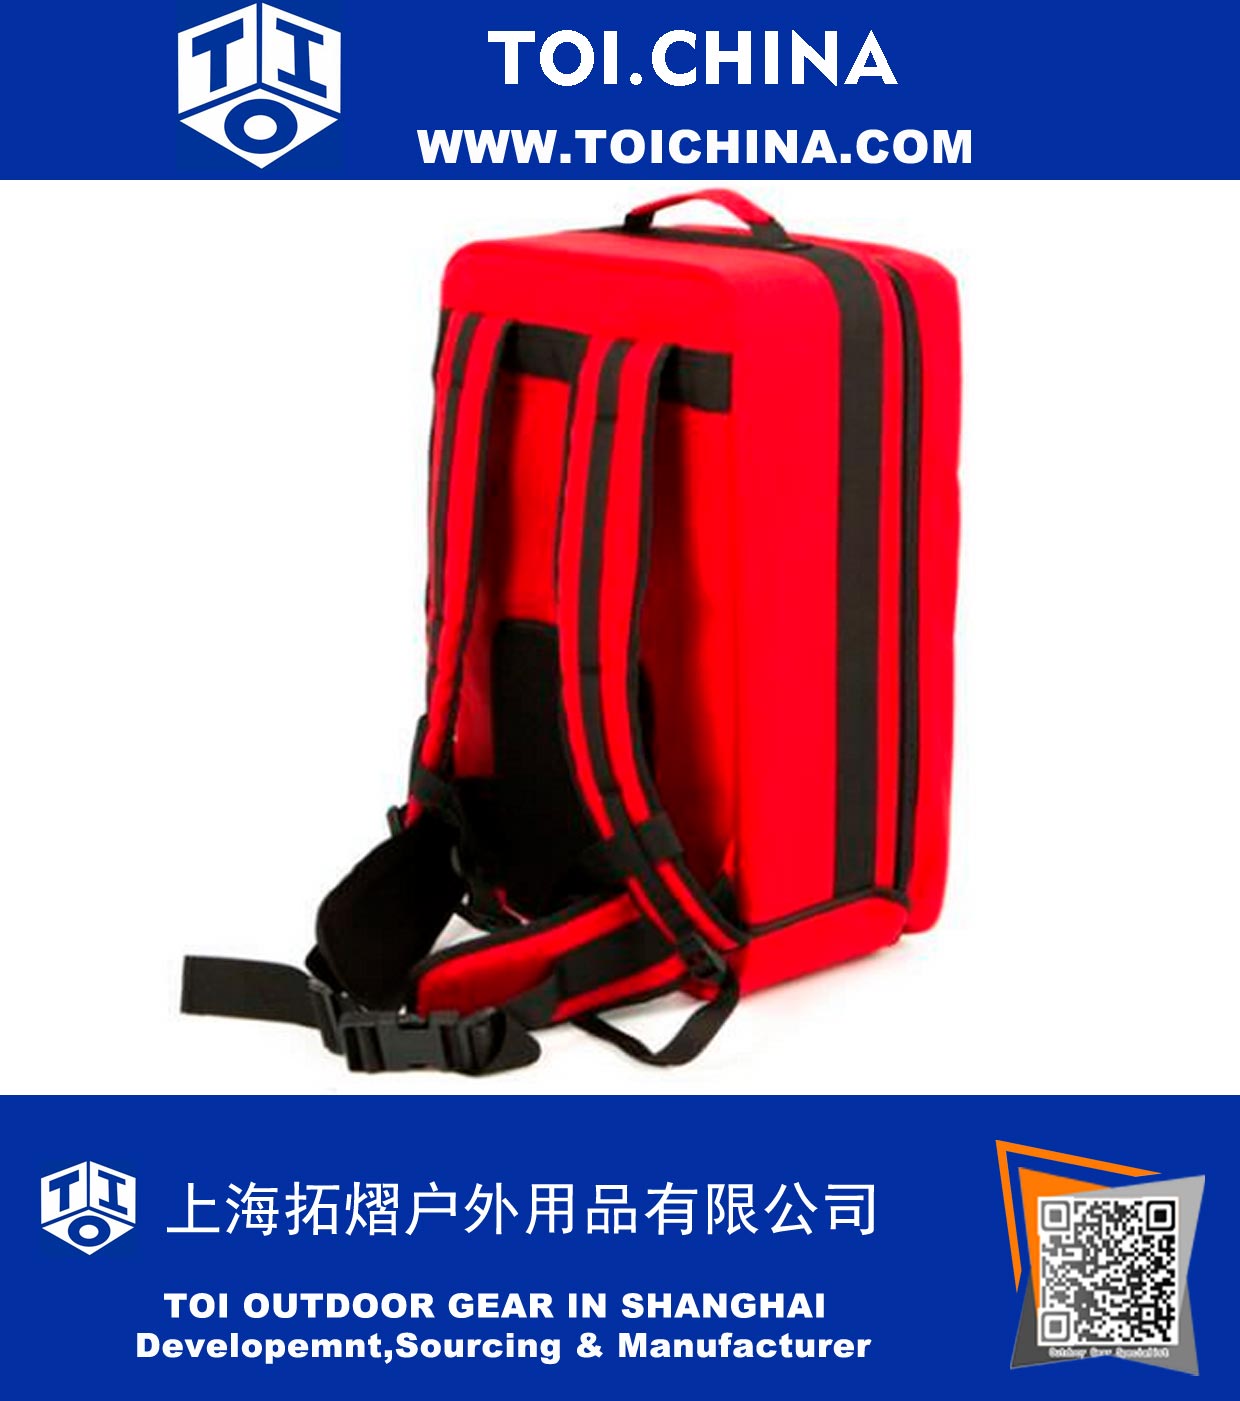 Oxygen Therapy Bag